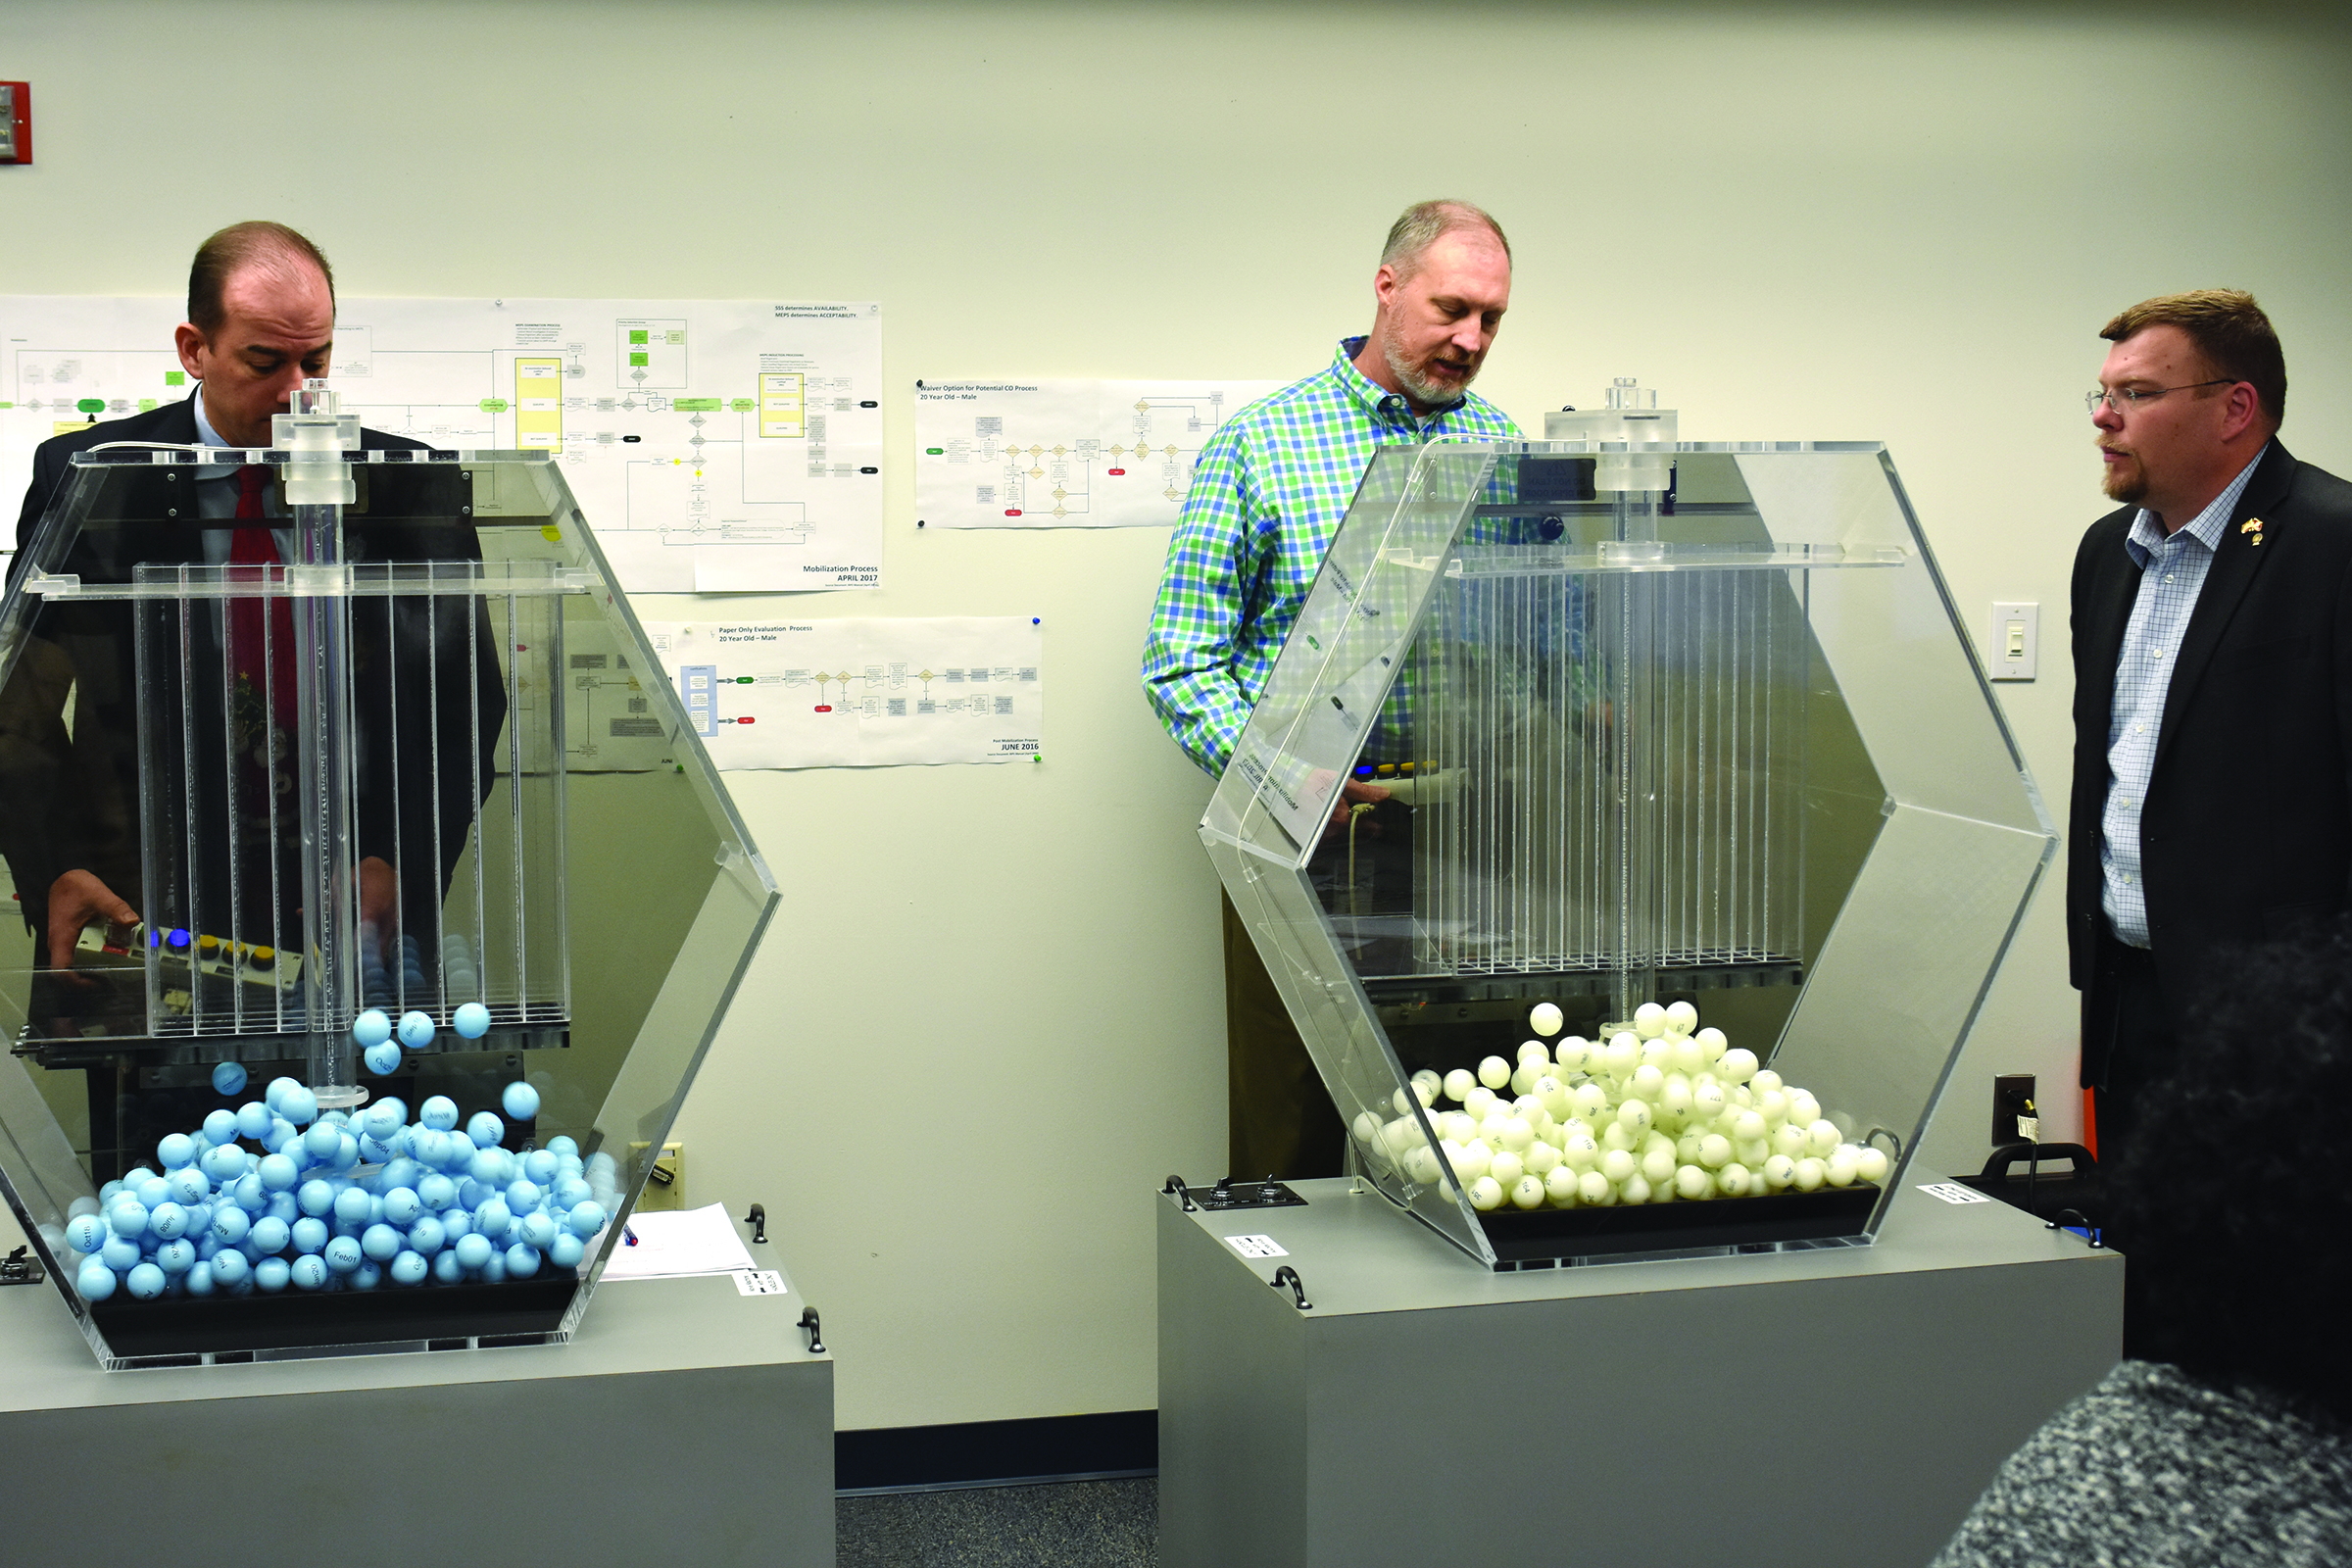 Source: Selective Service System, Selective Service System employees test draft-lottery equipment.